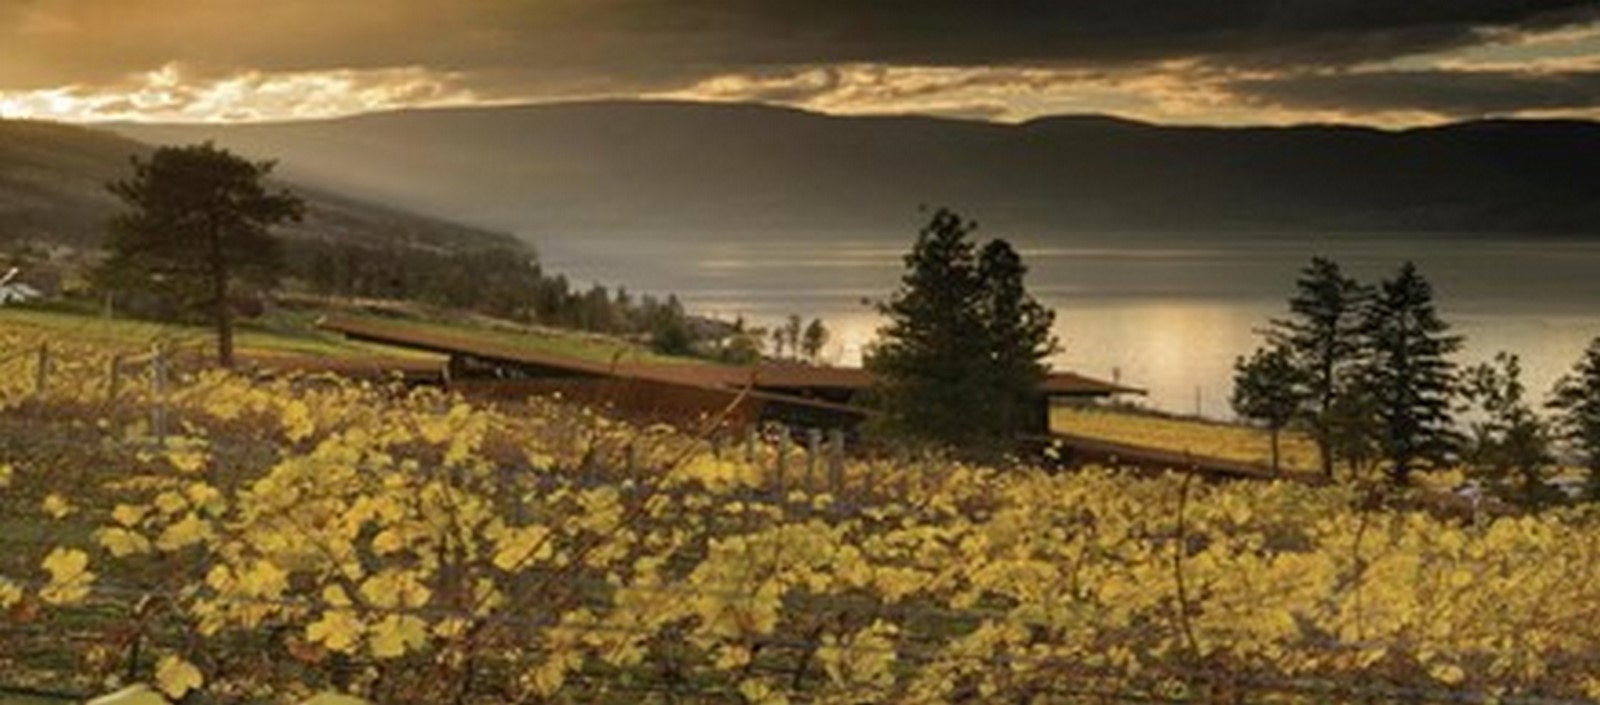 Martin’s Lane Winery by Olson Kundig: A Gravity- flow Winery - Sheet1